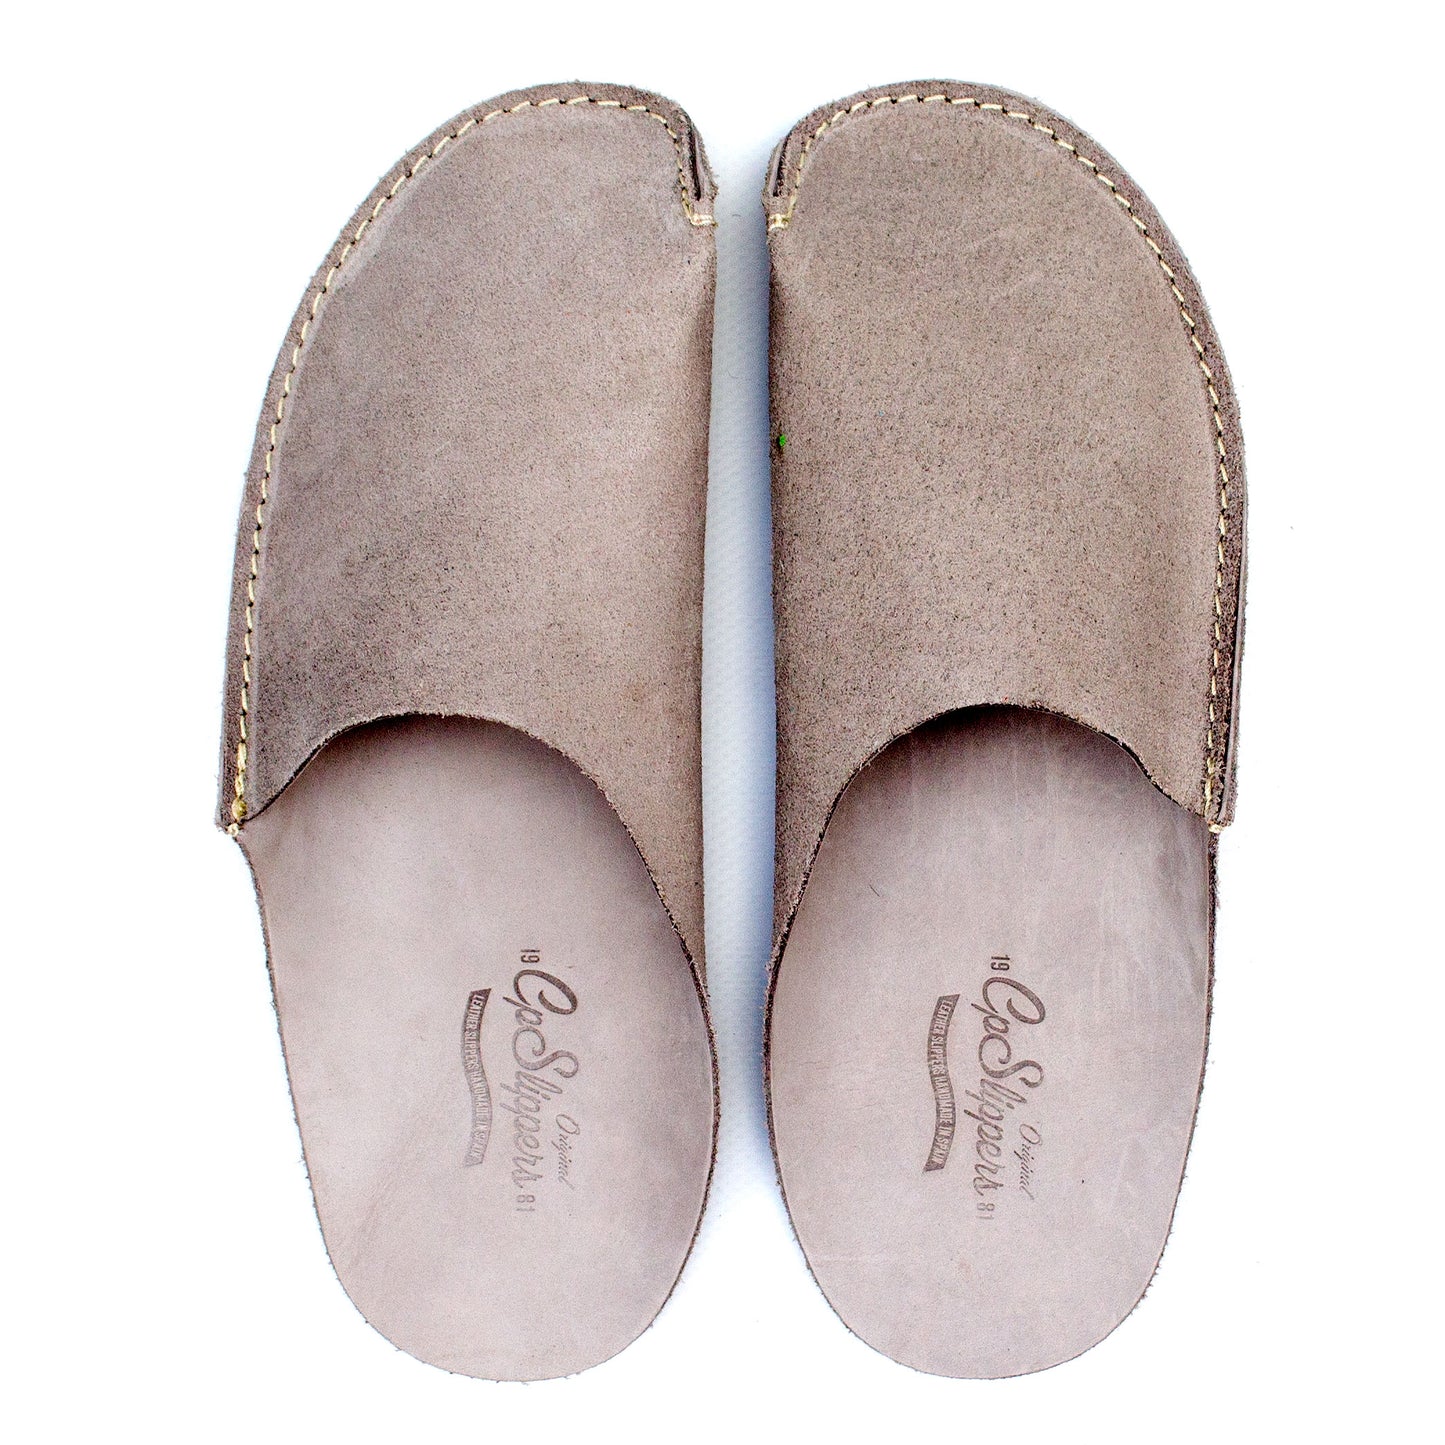 Gray Leather Slipper for Men and Women by CP Slippers Minimalist